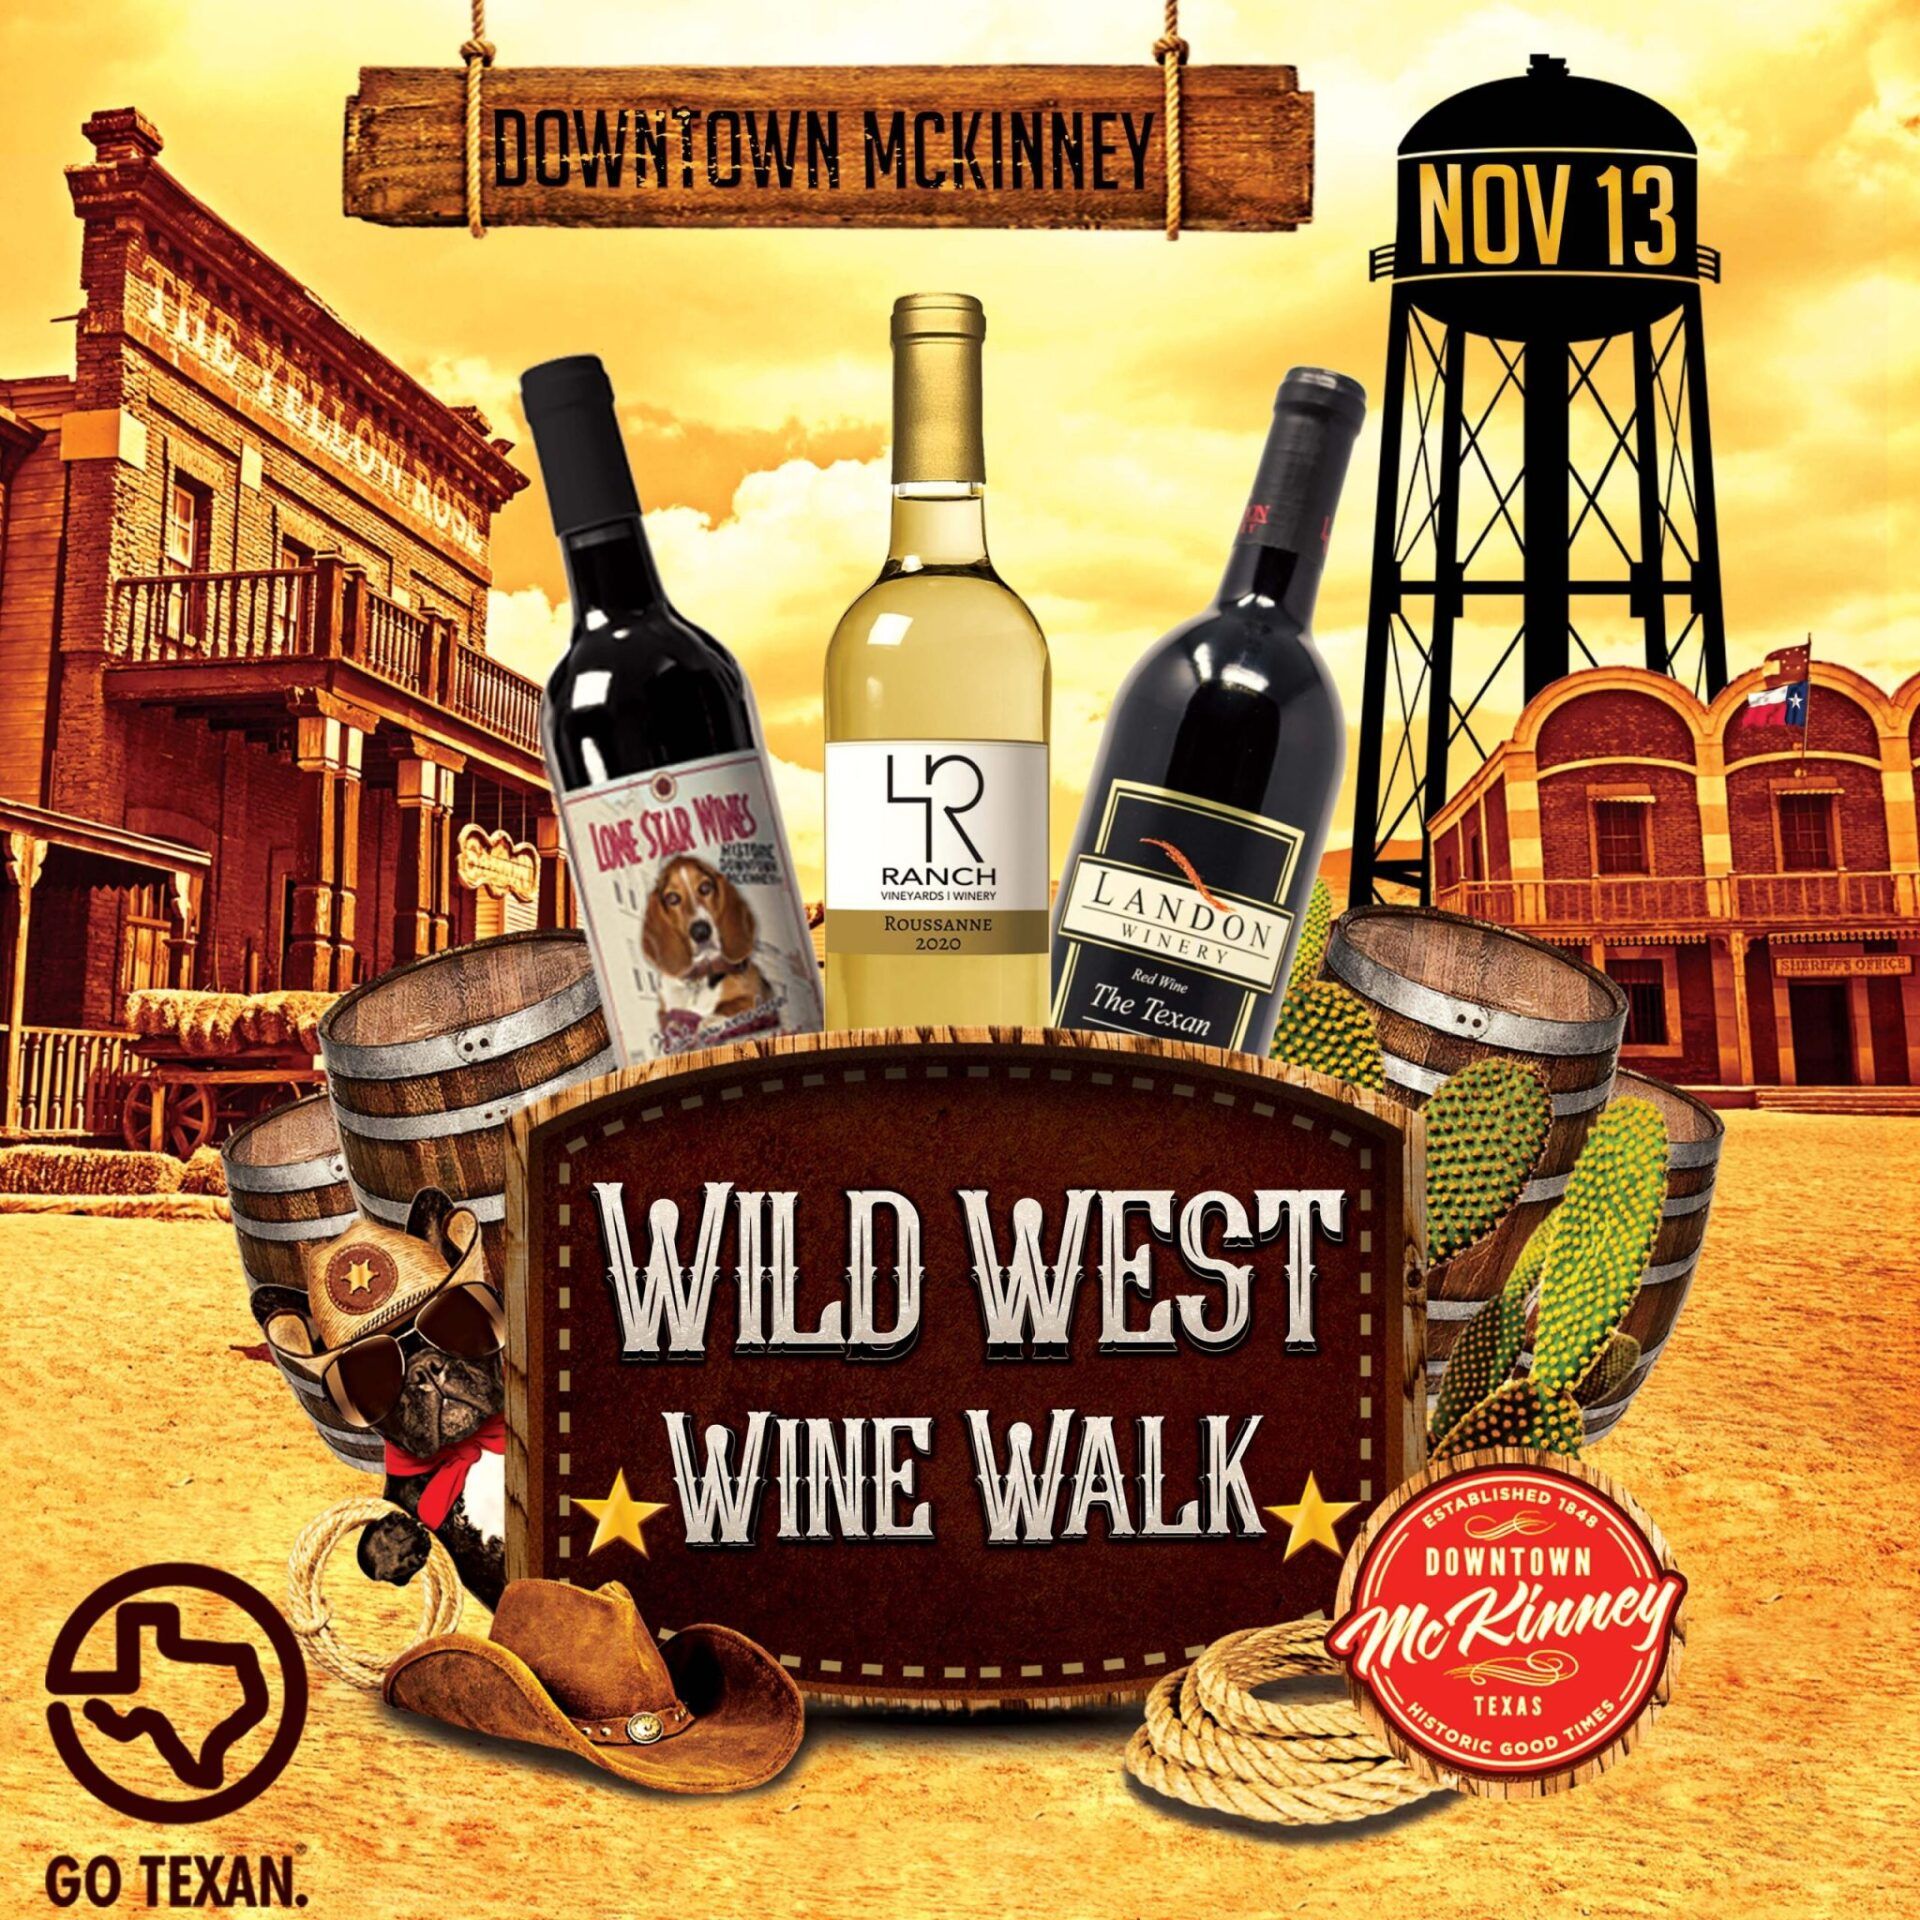 McKinney Wild West Wine Walk Kelly's art Shack and Events is a stop